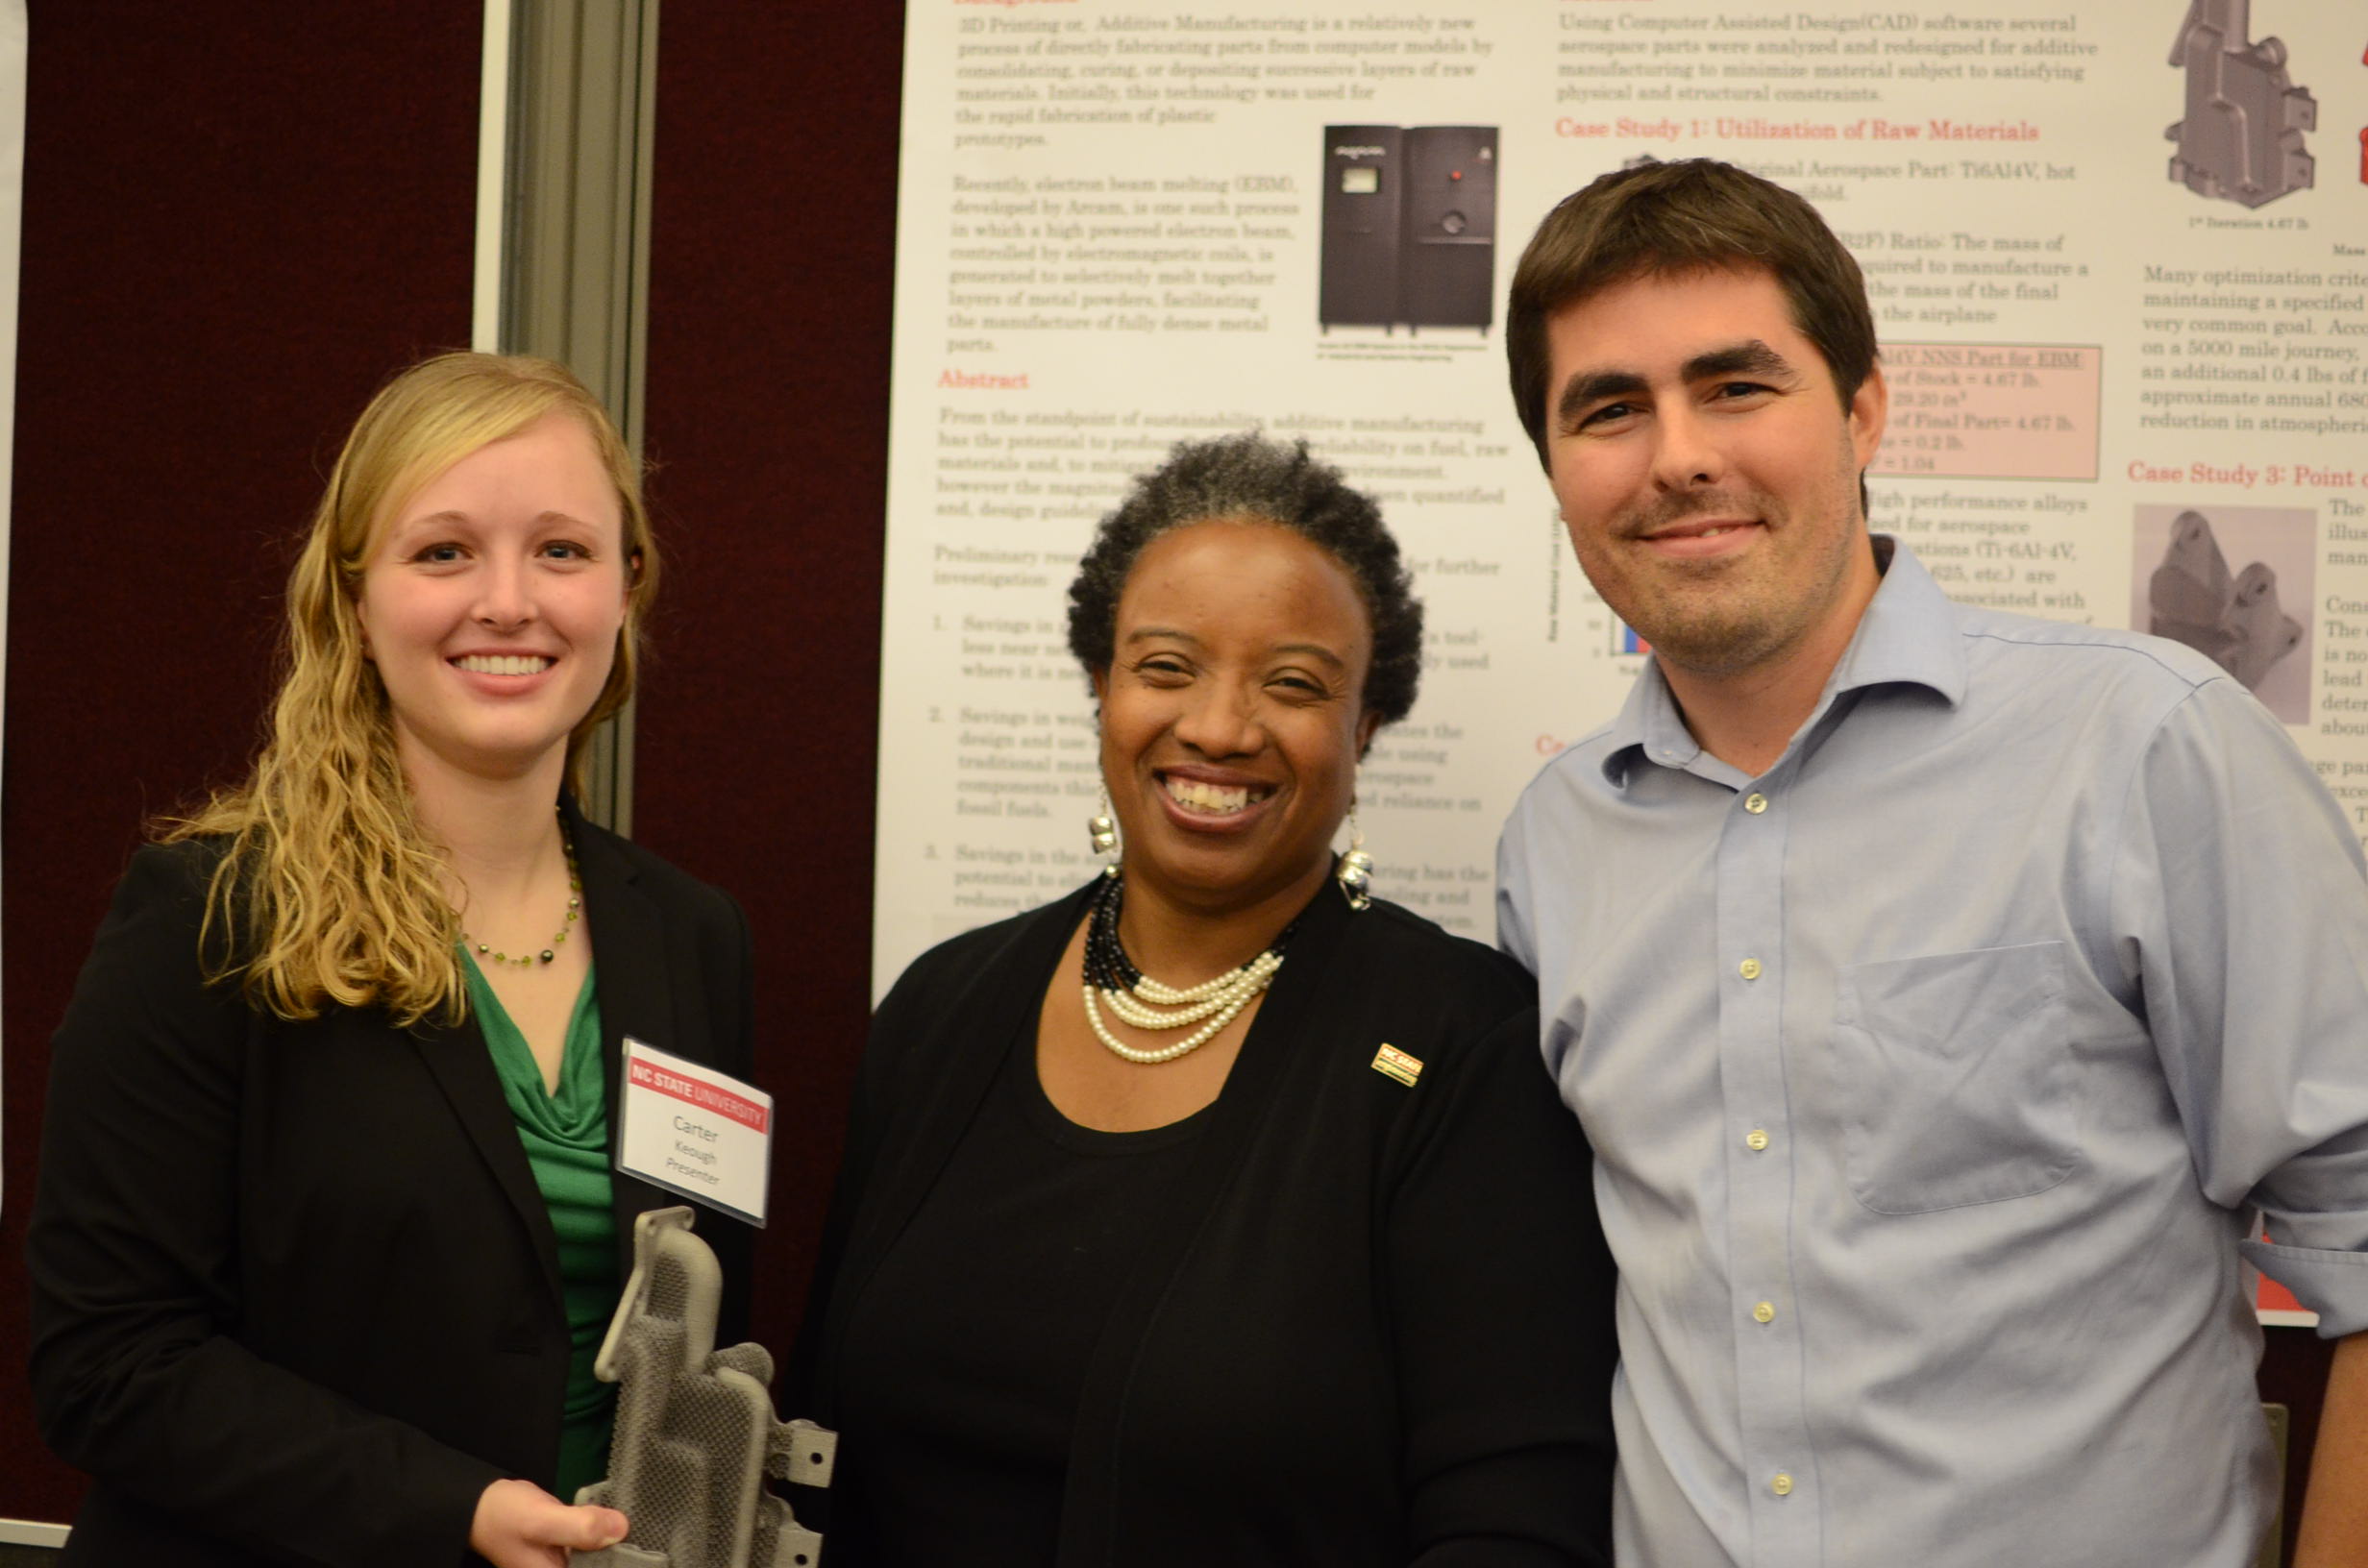 Carter-Keough-Presents-at-The-NCSU-Summer-Undergraduate-Research-Symposium-1